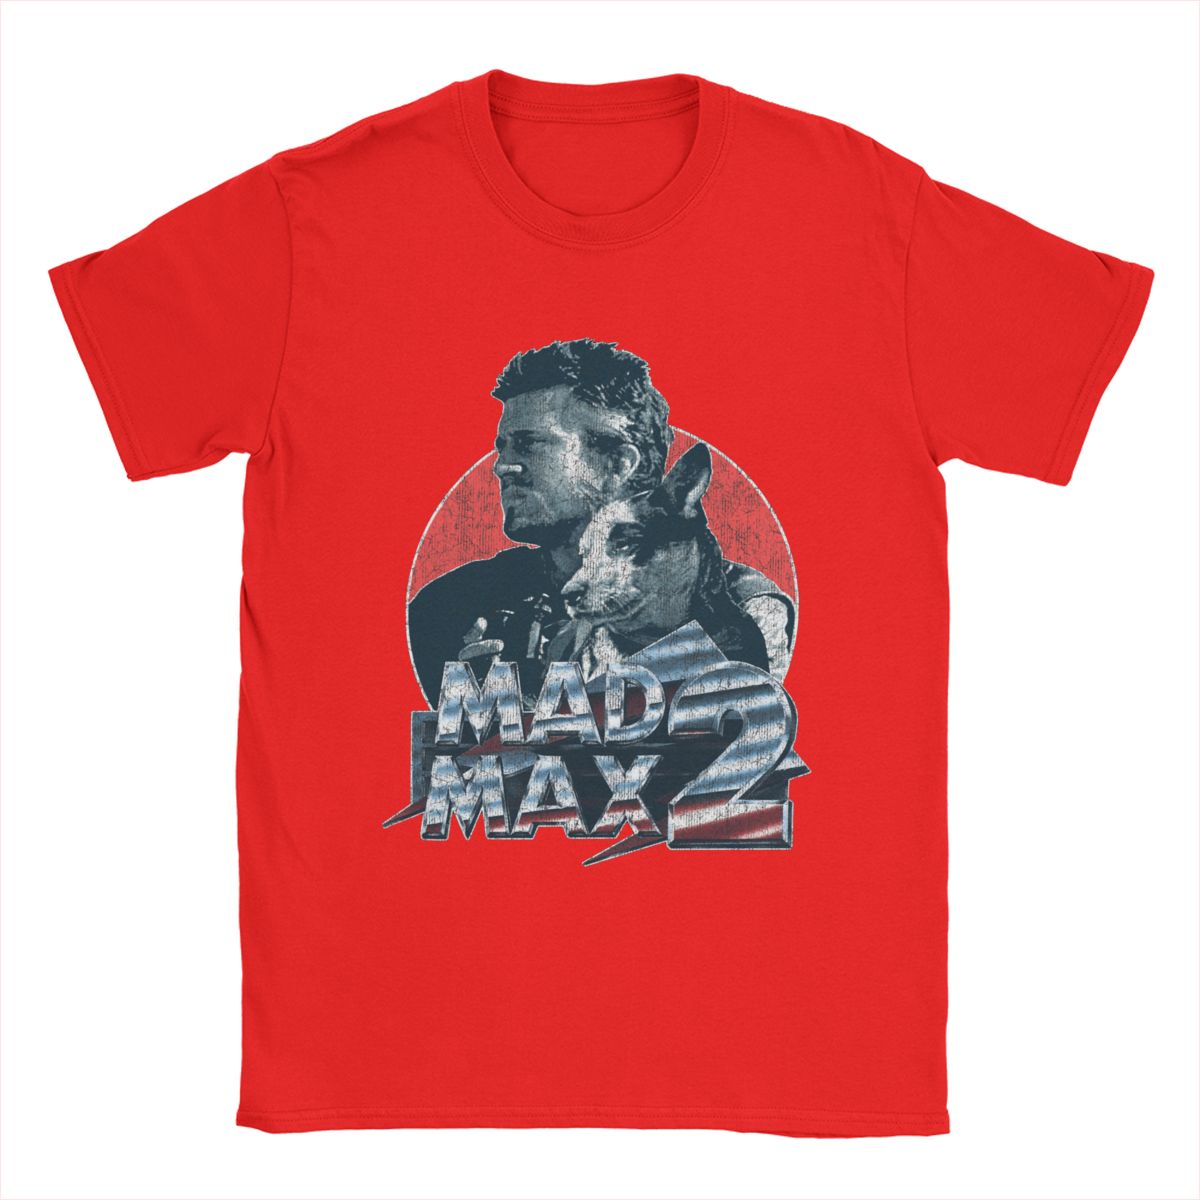 Mad Max - T-Shirt 100% Cotton - Classic 1980's Action - Movie Buff Fanwear-Red-S-